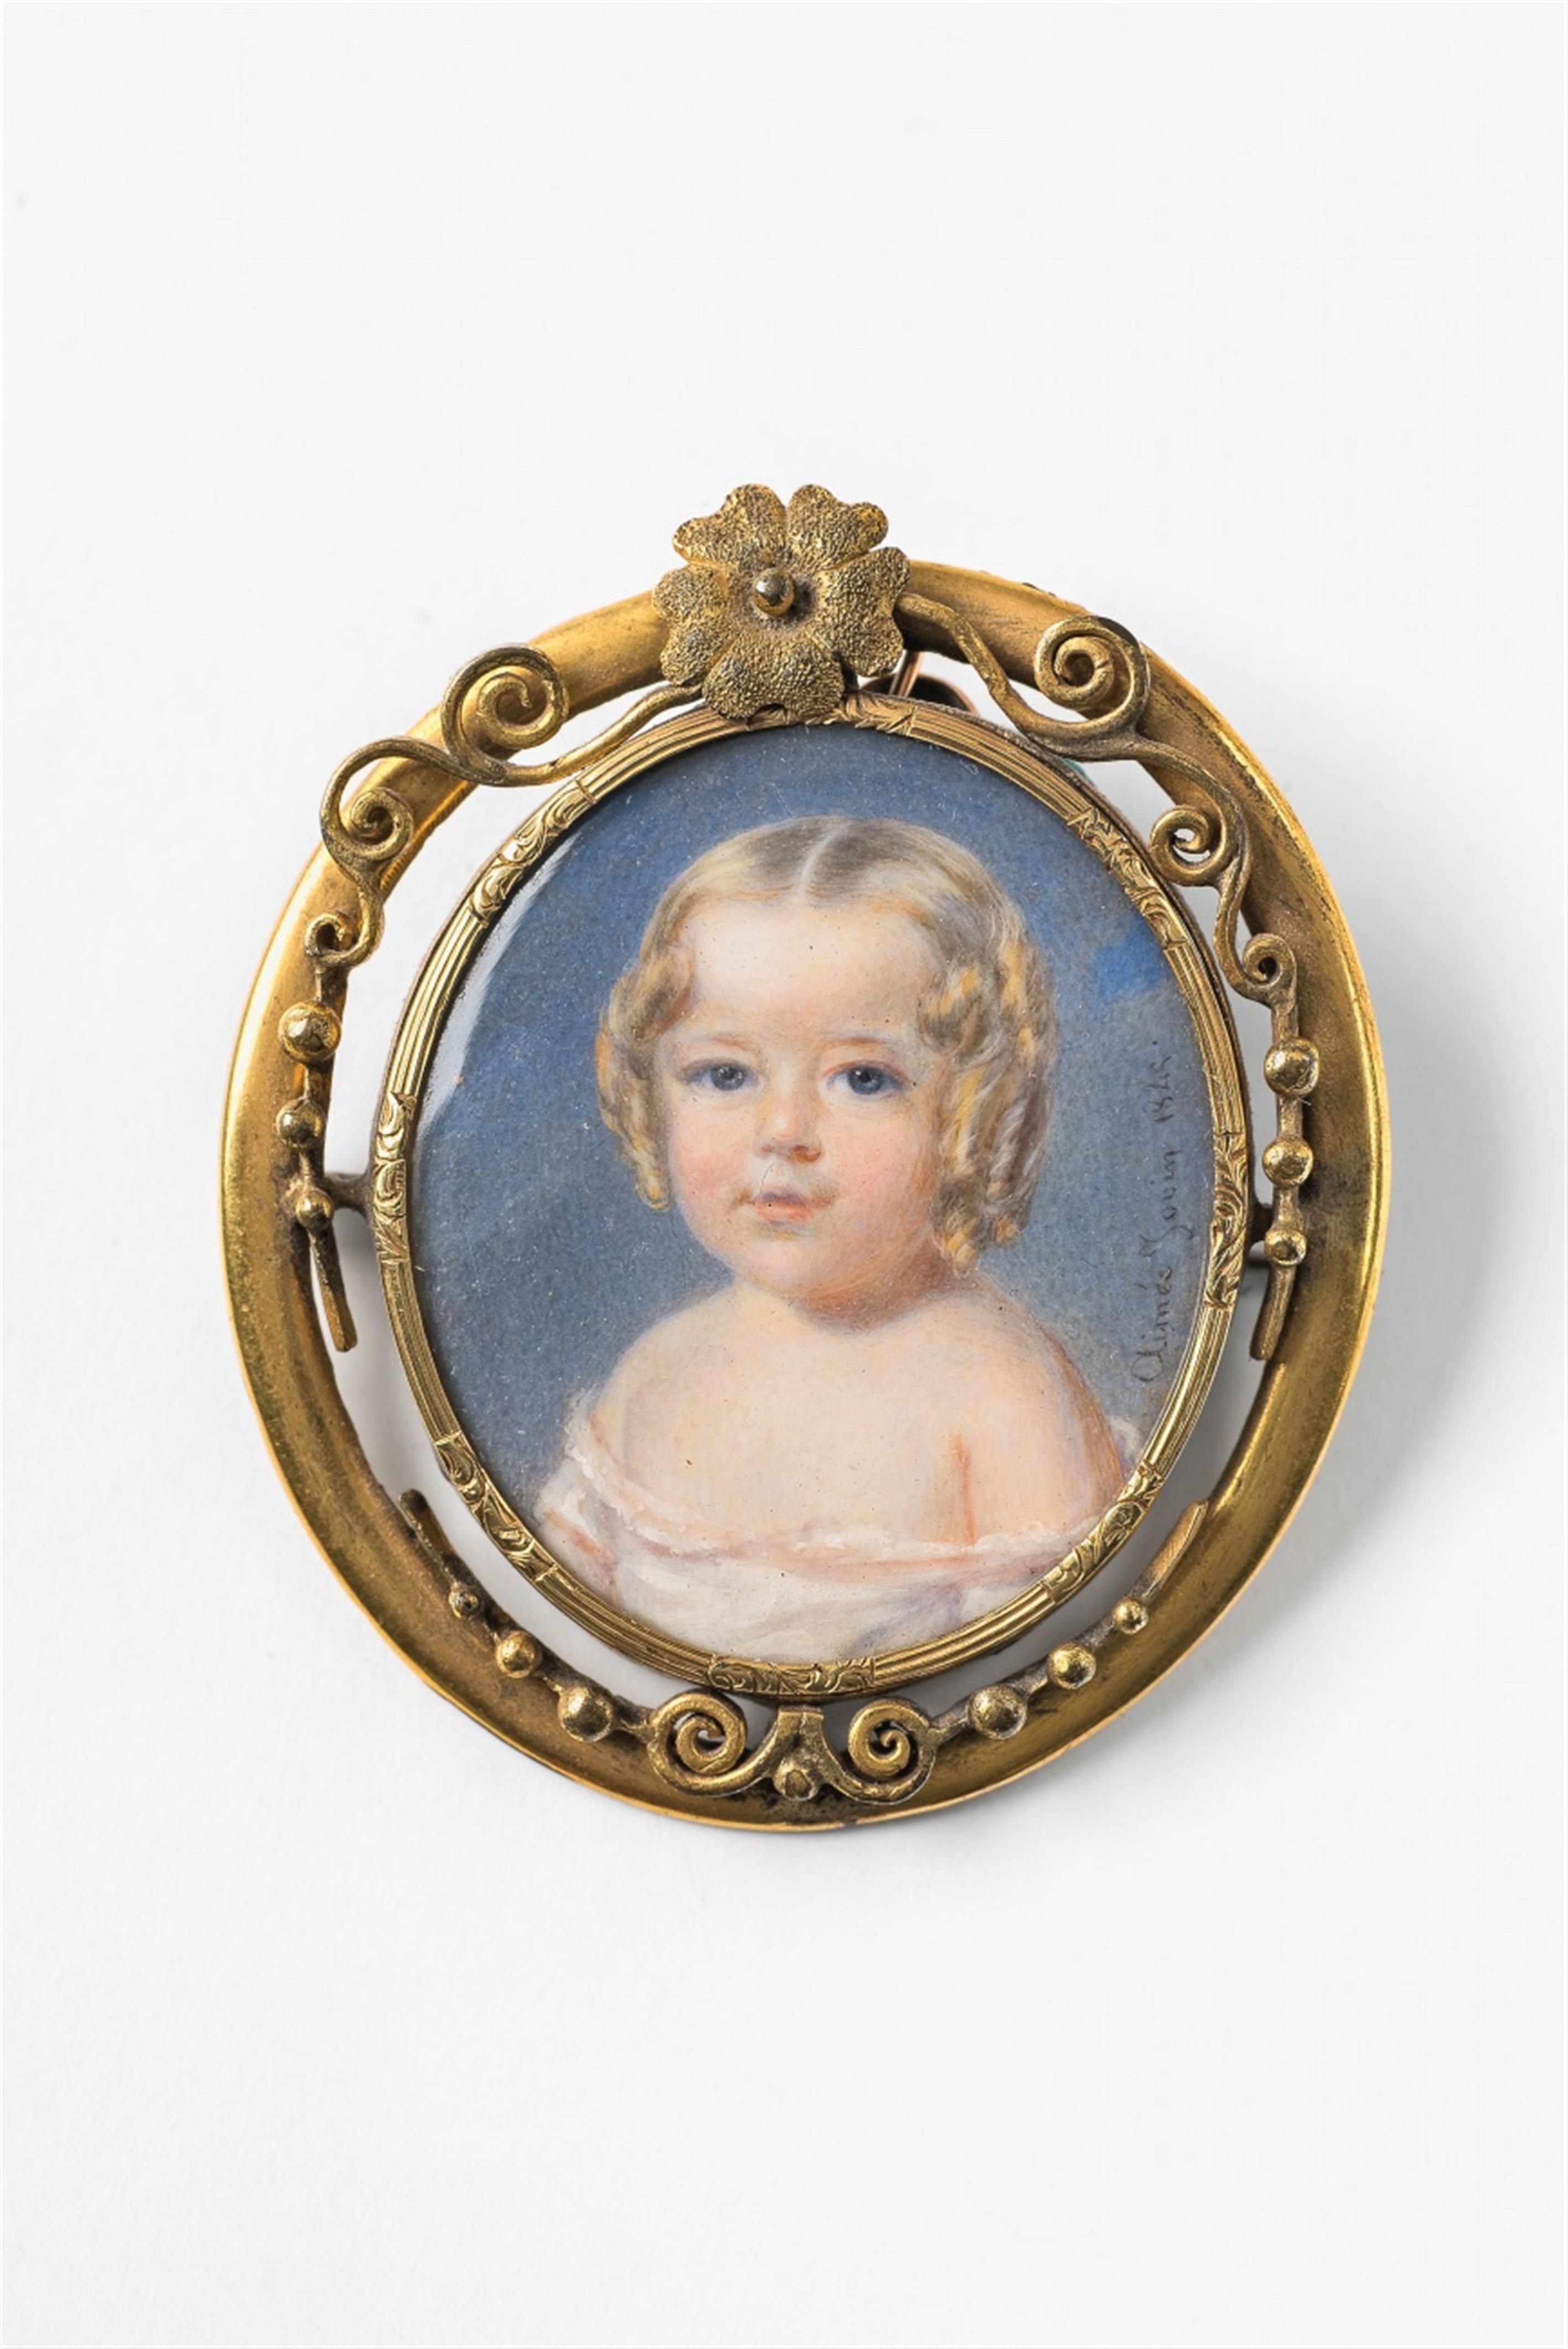 A brooch with a portrait miniature of a baby - image-1